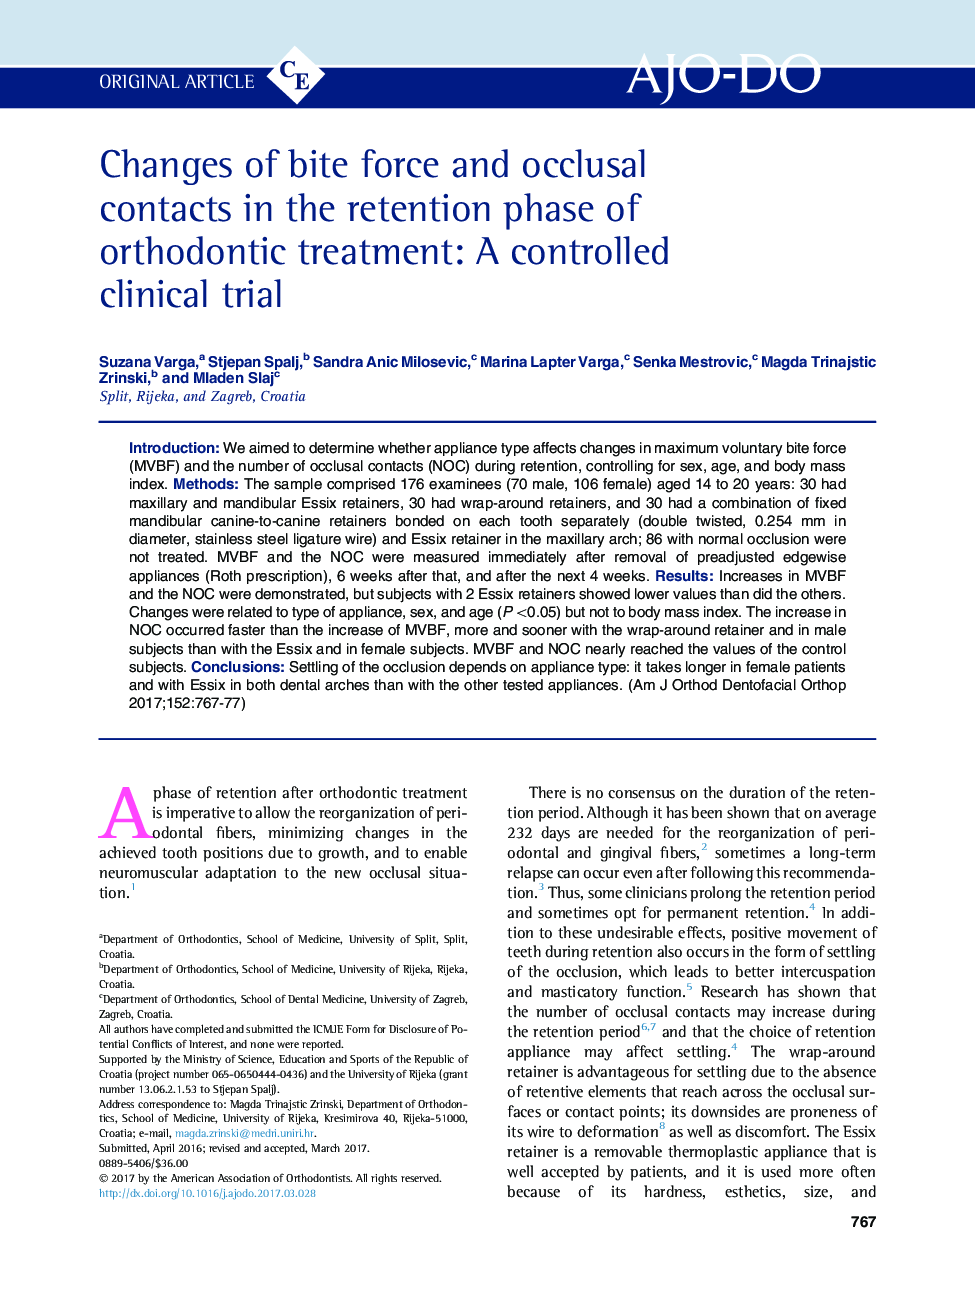 Changes of bite force and occlusal contacts in the retention phase of orthodontic treatment: A controlled clinical trial